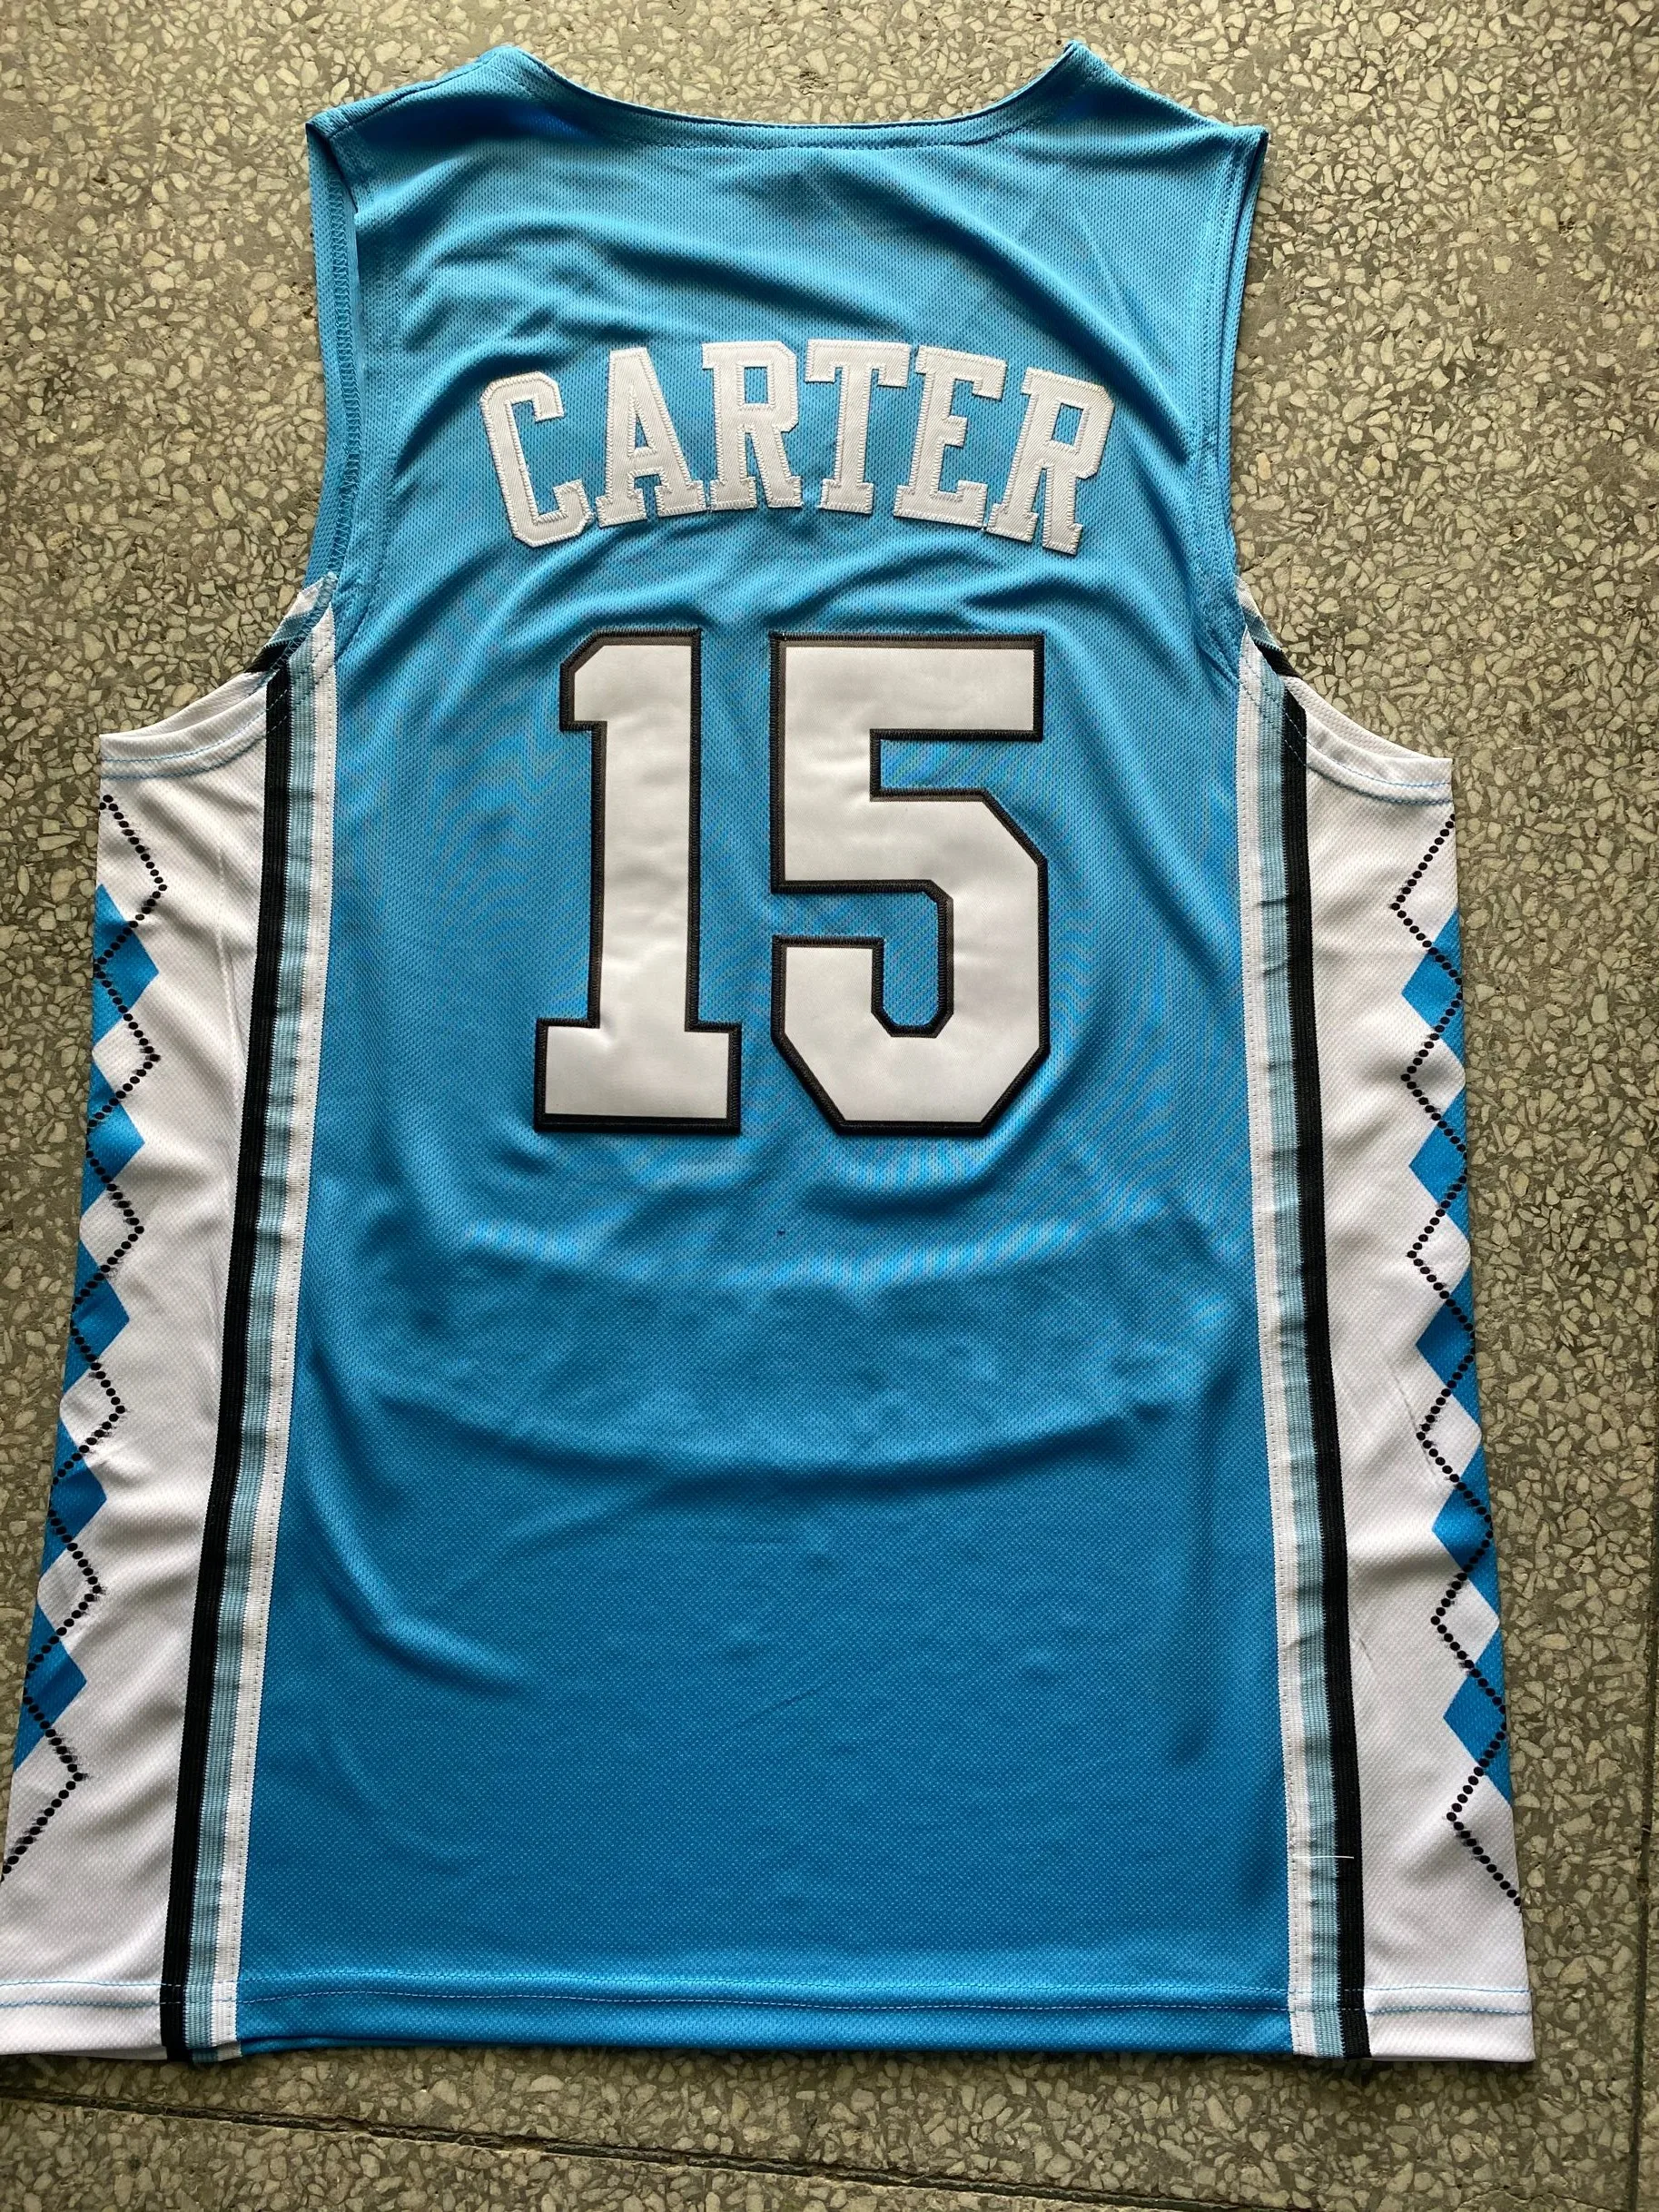 

2 Cole Anthony #15 vince carter Stitched Basketball Jersey Sewn Camisa Embroidery